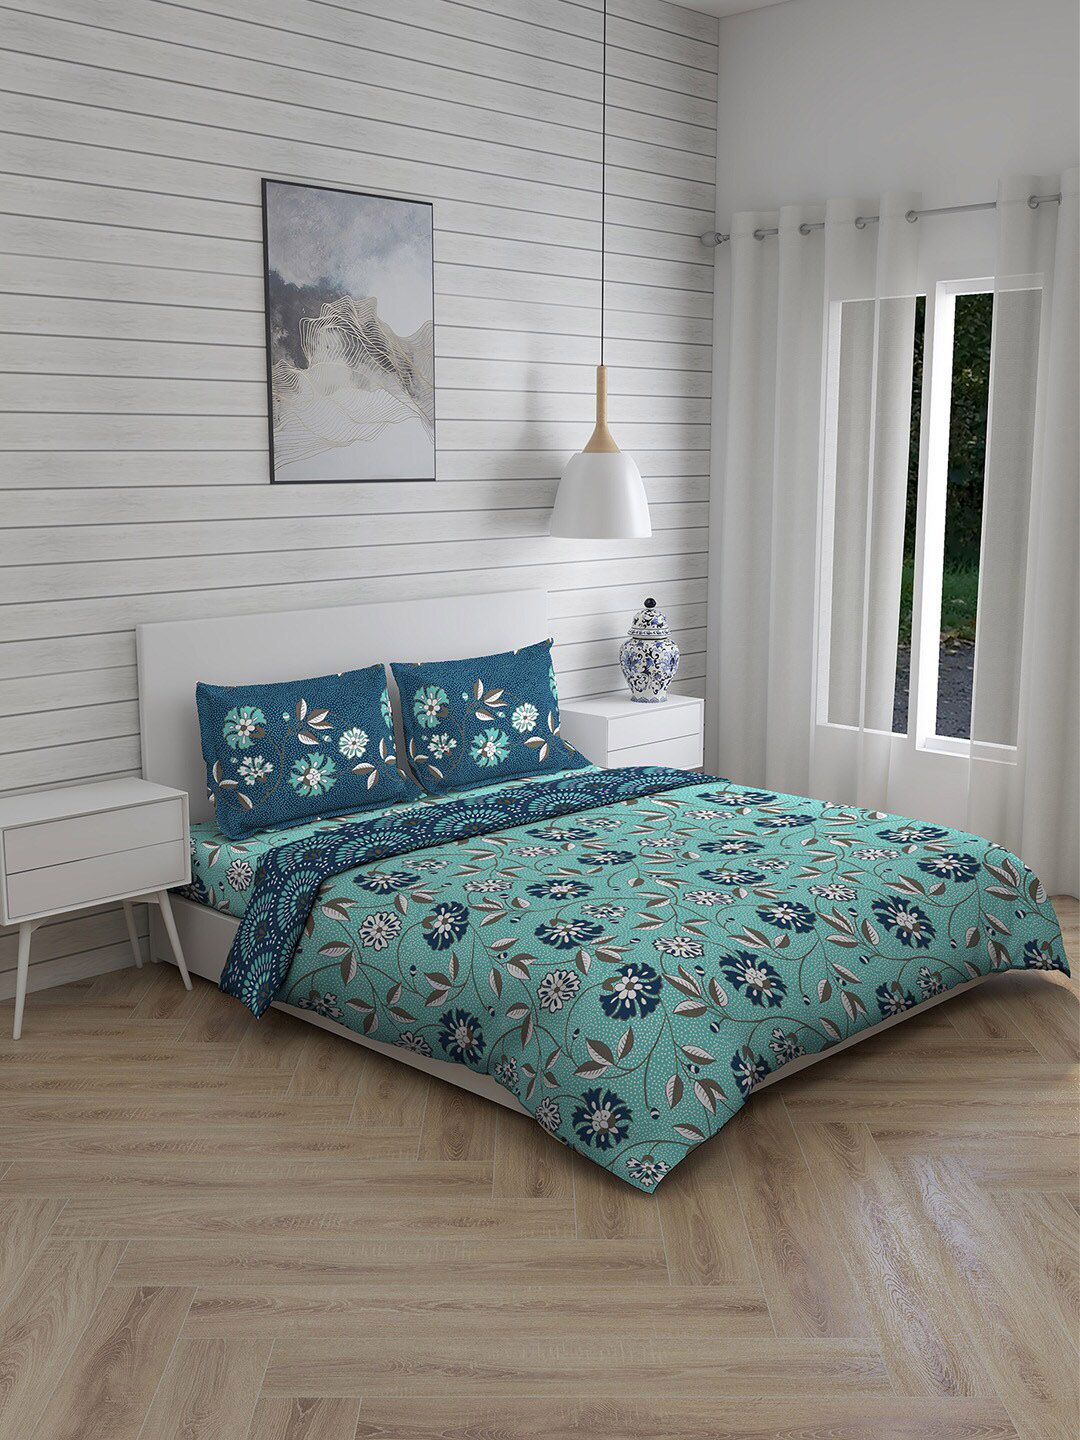 Boutique Living India Green & White Floral Printed Cotton 112 TC Double Queen Bedding Set Price in India